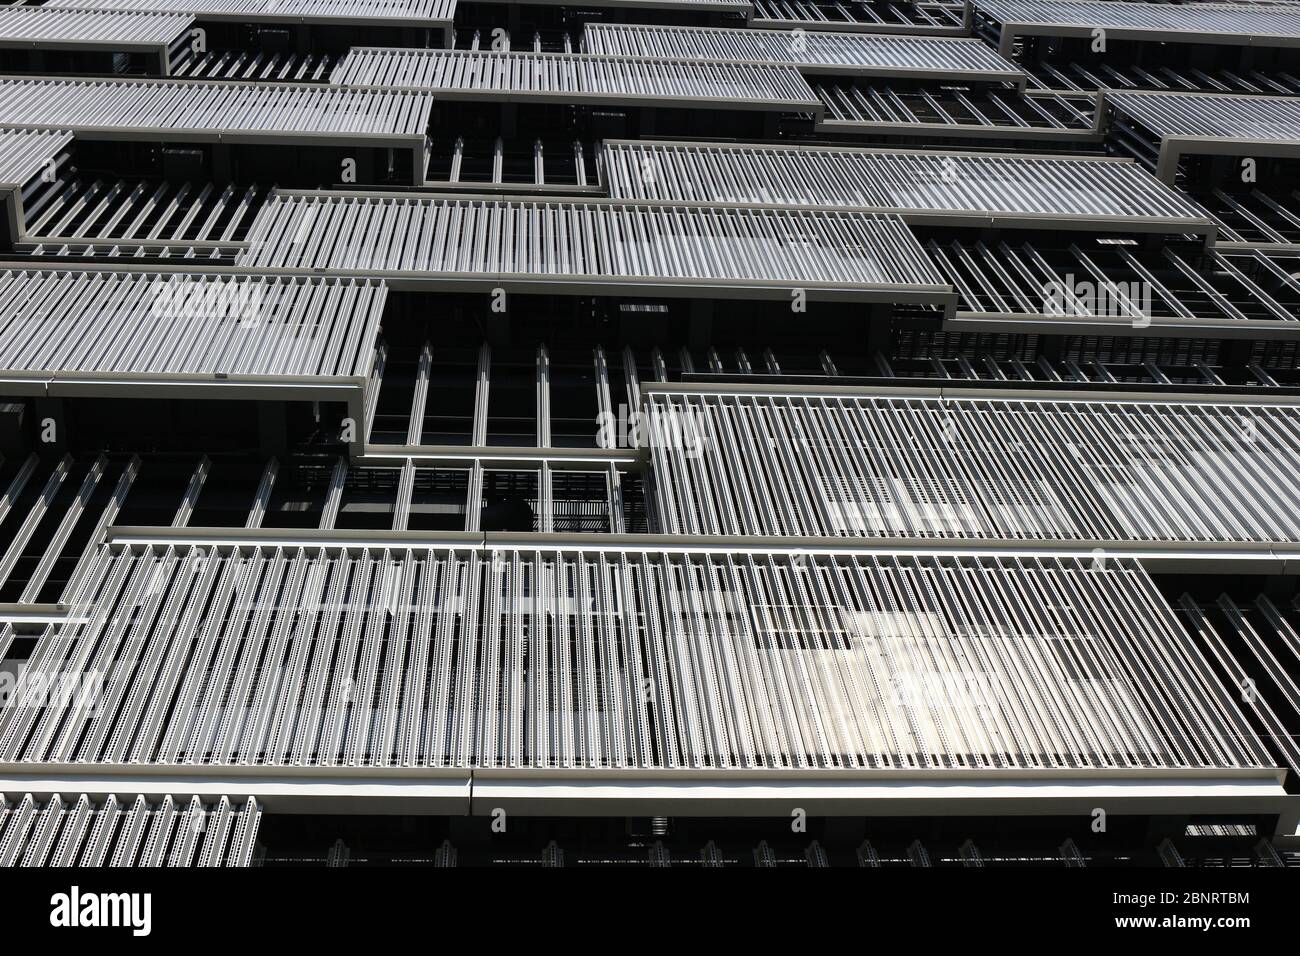 Building exterior decorated with mesh metal grid boards Stock Photo